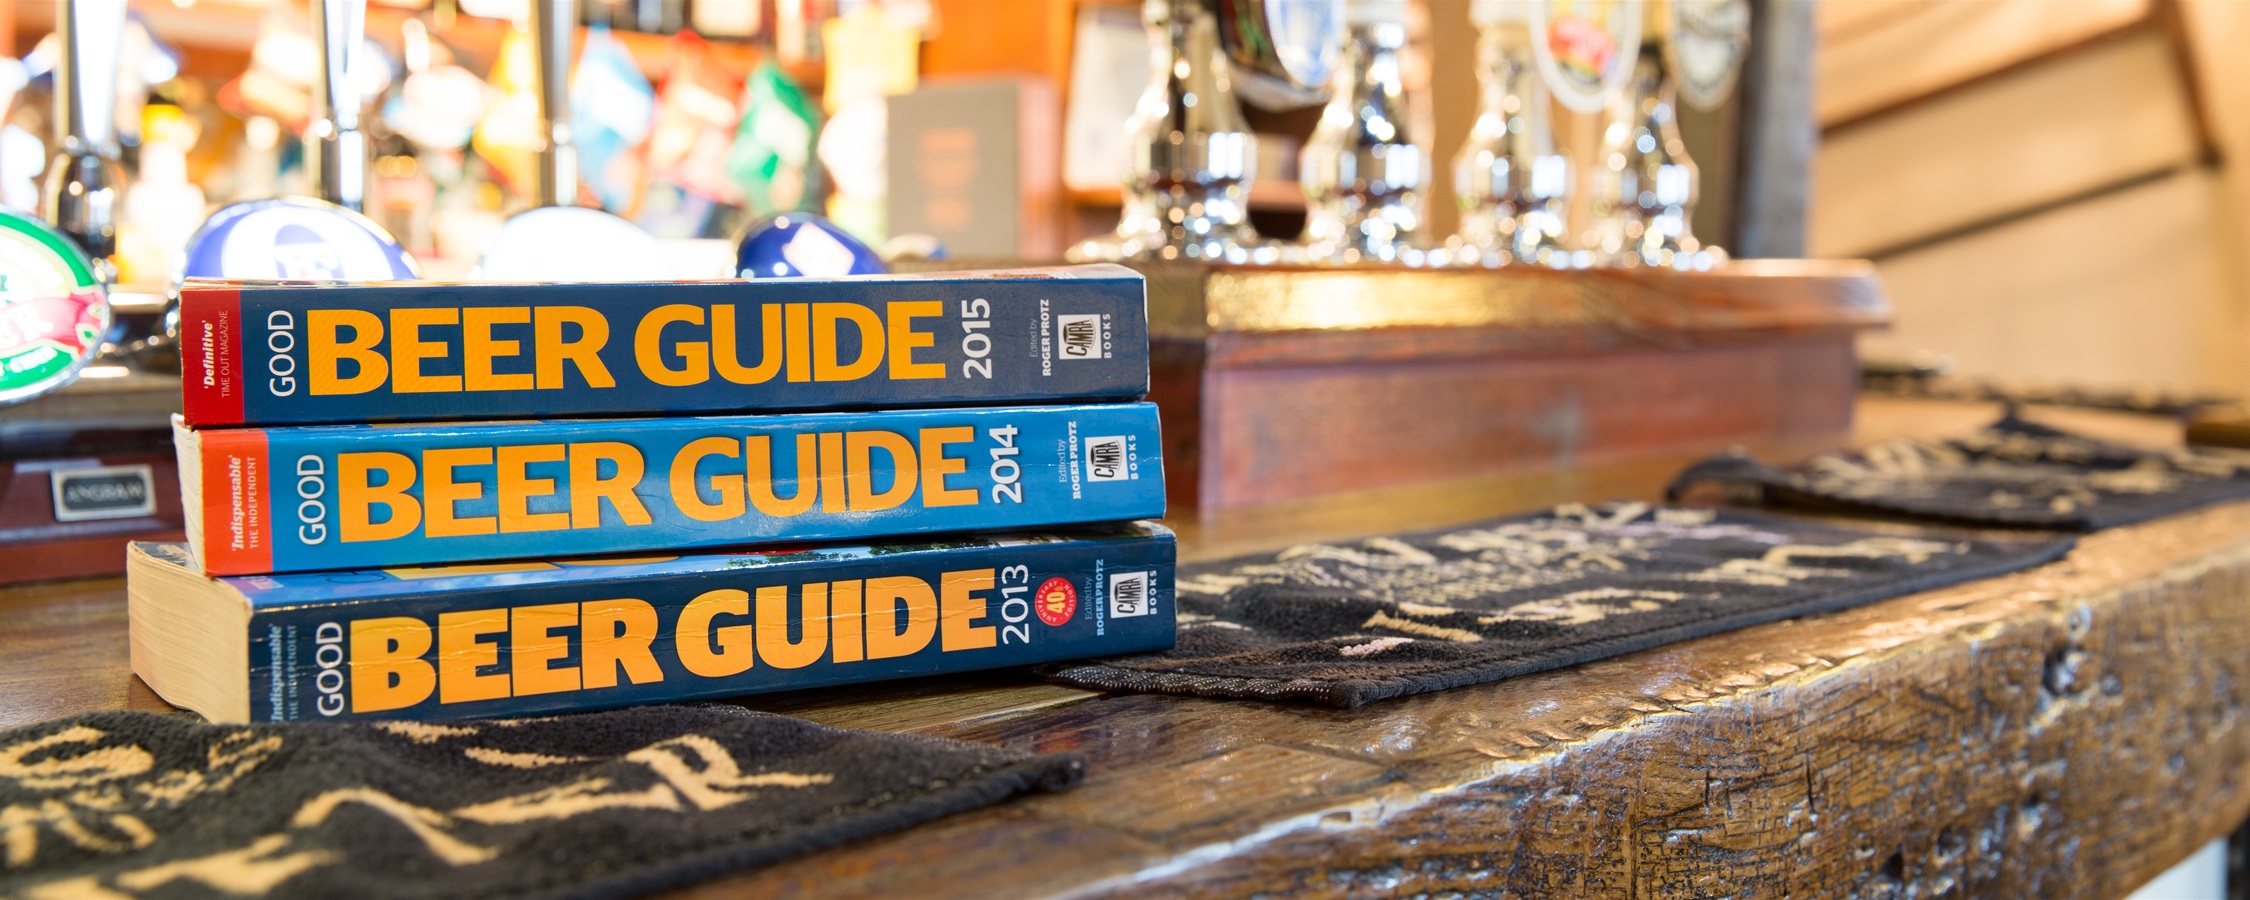 CAMRA's Good Beer Guide - We're in it!... Since 2010